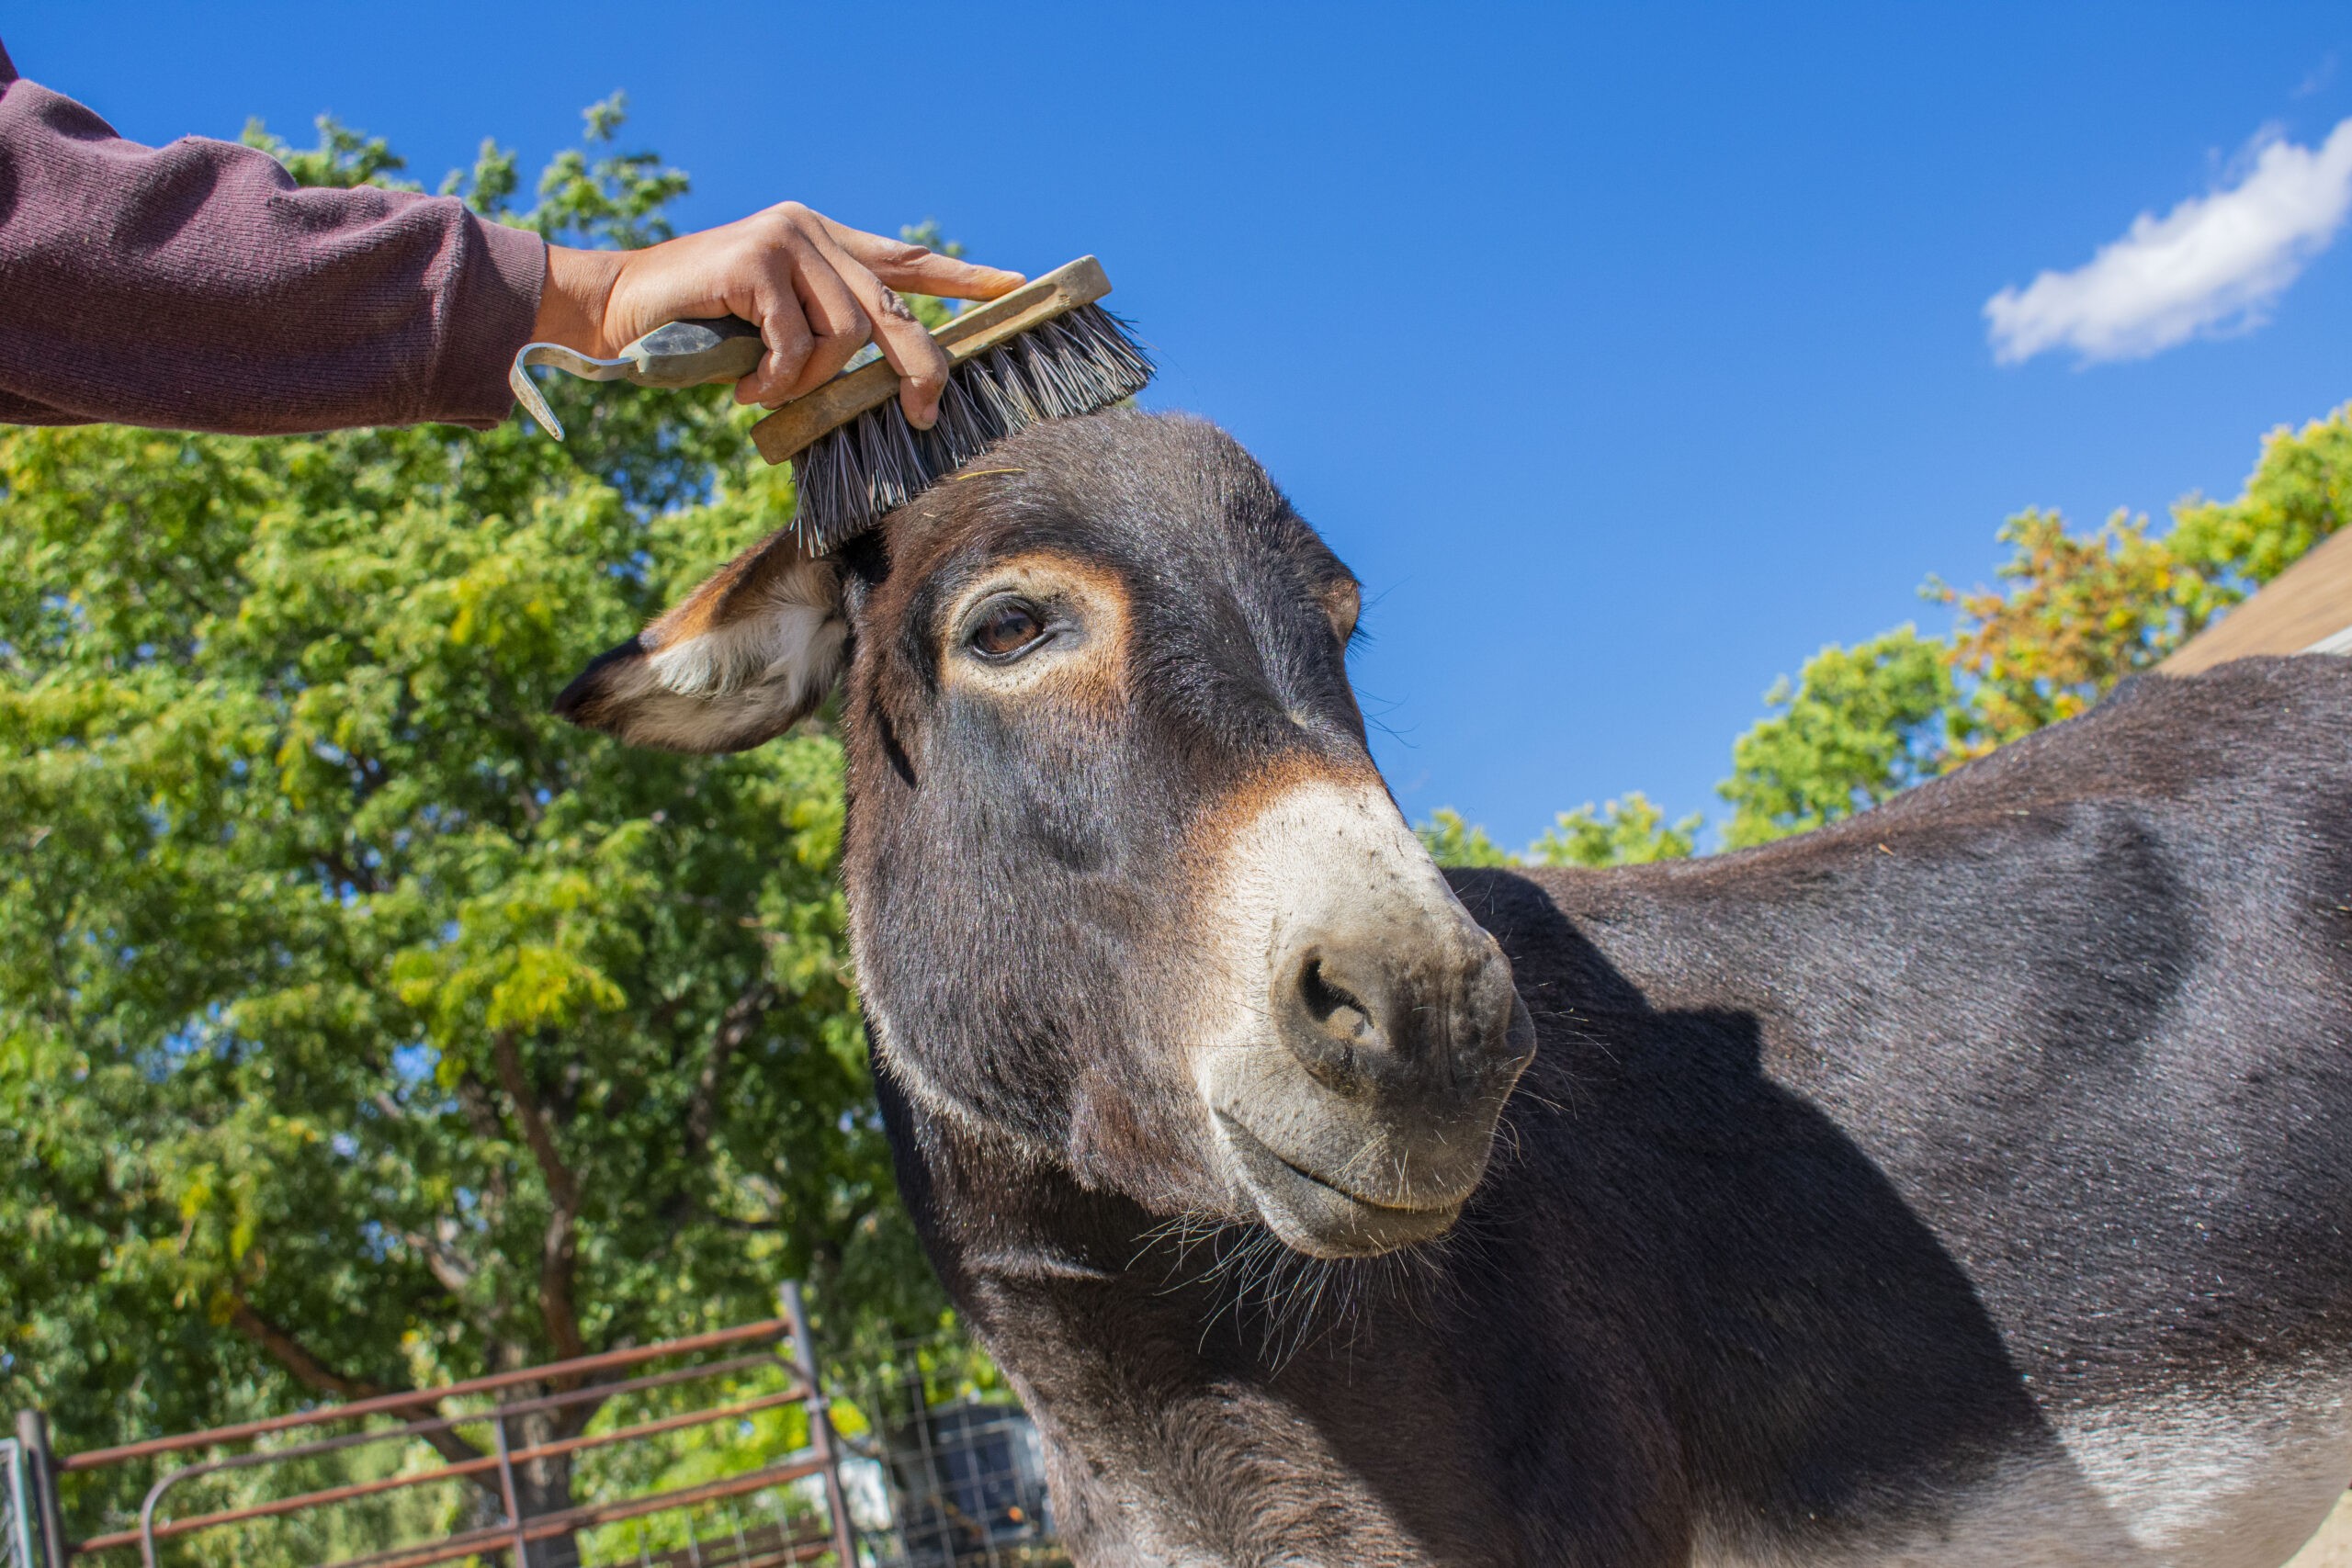 Rescued Donkey with people